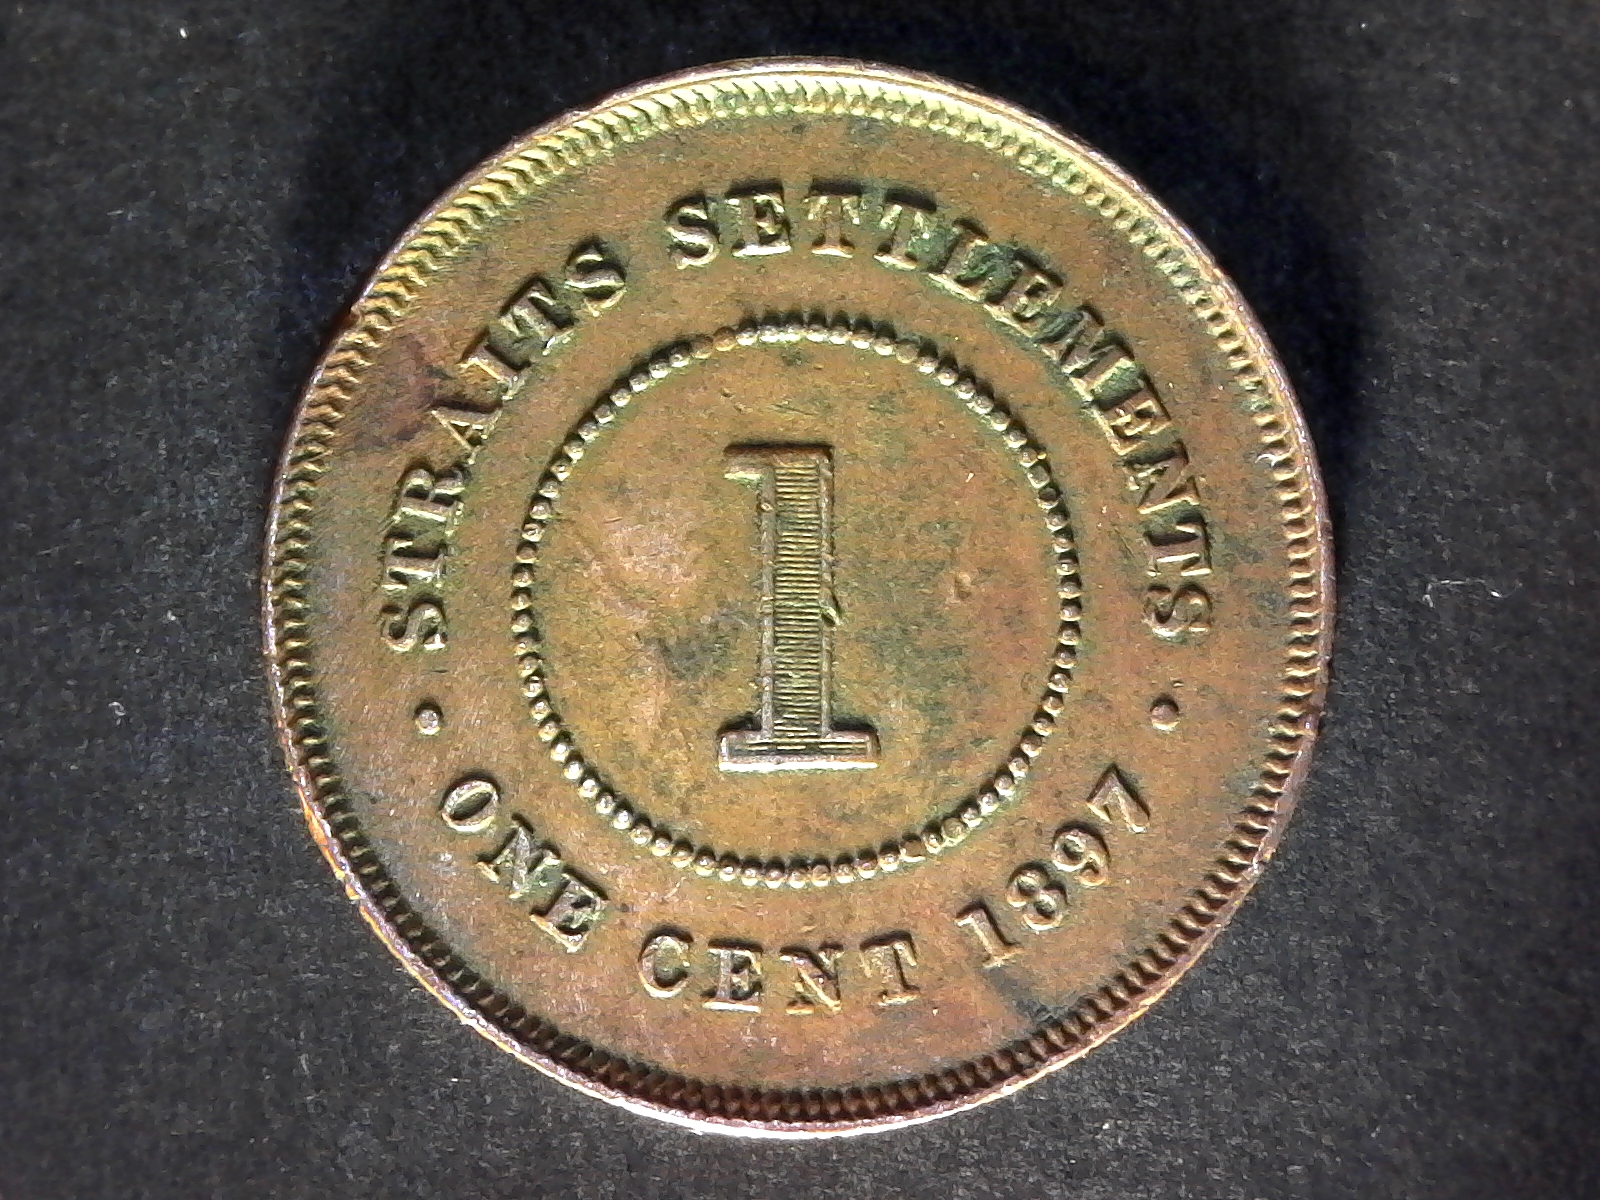 Straits settlements One cent 1897 obv A.jpg